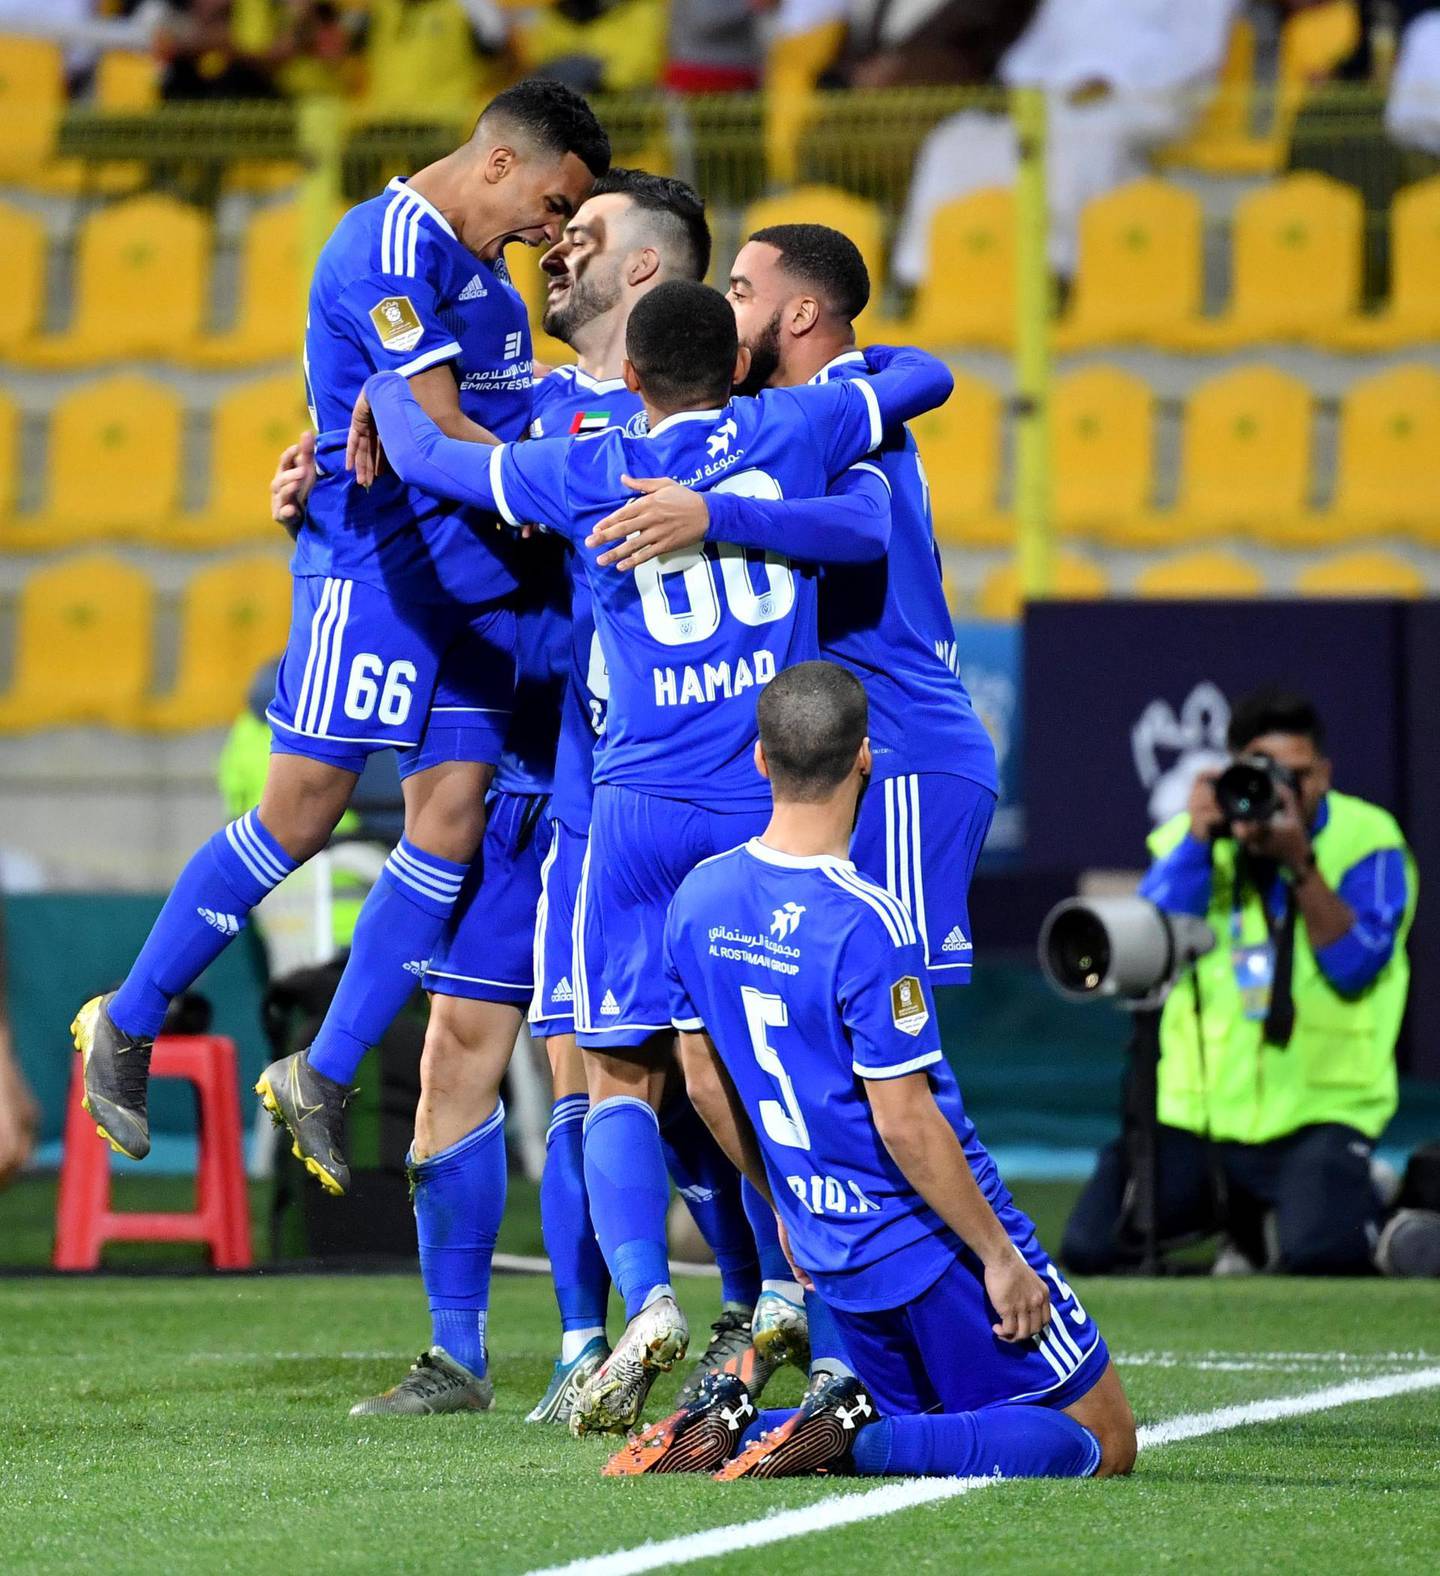 Al Nasr players react around Tozo after the Portuguese netted their second goal to beat Shabaab Al Ahli 2-1 in the Arabian Gulf Cup final at Zabeel stadium in Dubai on Friday. Courtesy Arshad Khan Aboobaker/PLC